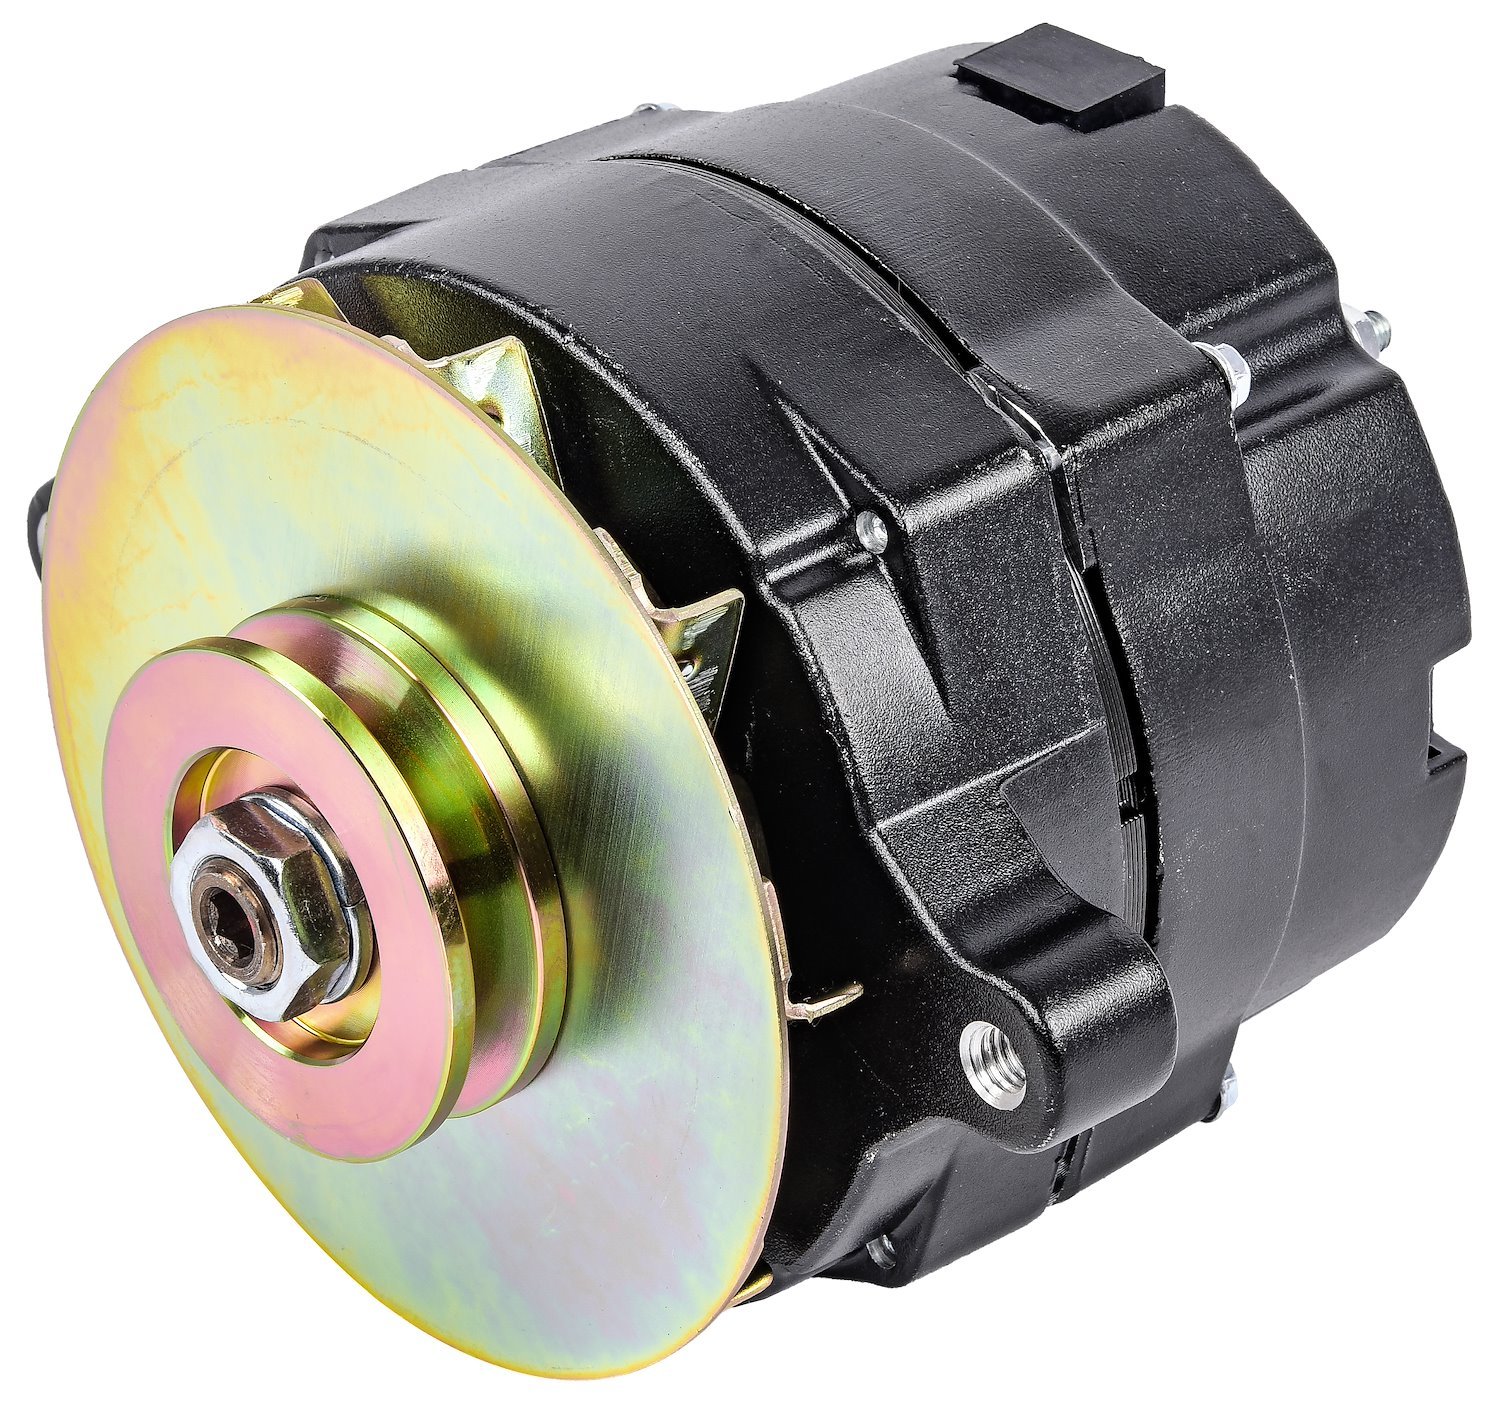 Ford 1-Wire Alternator, 140 amp Output with Single Groove V-Belt Pulley [Black Finish]